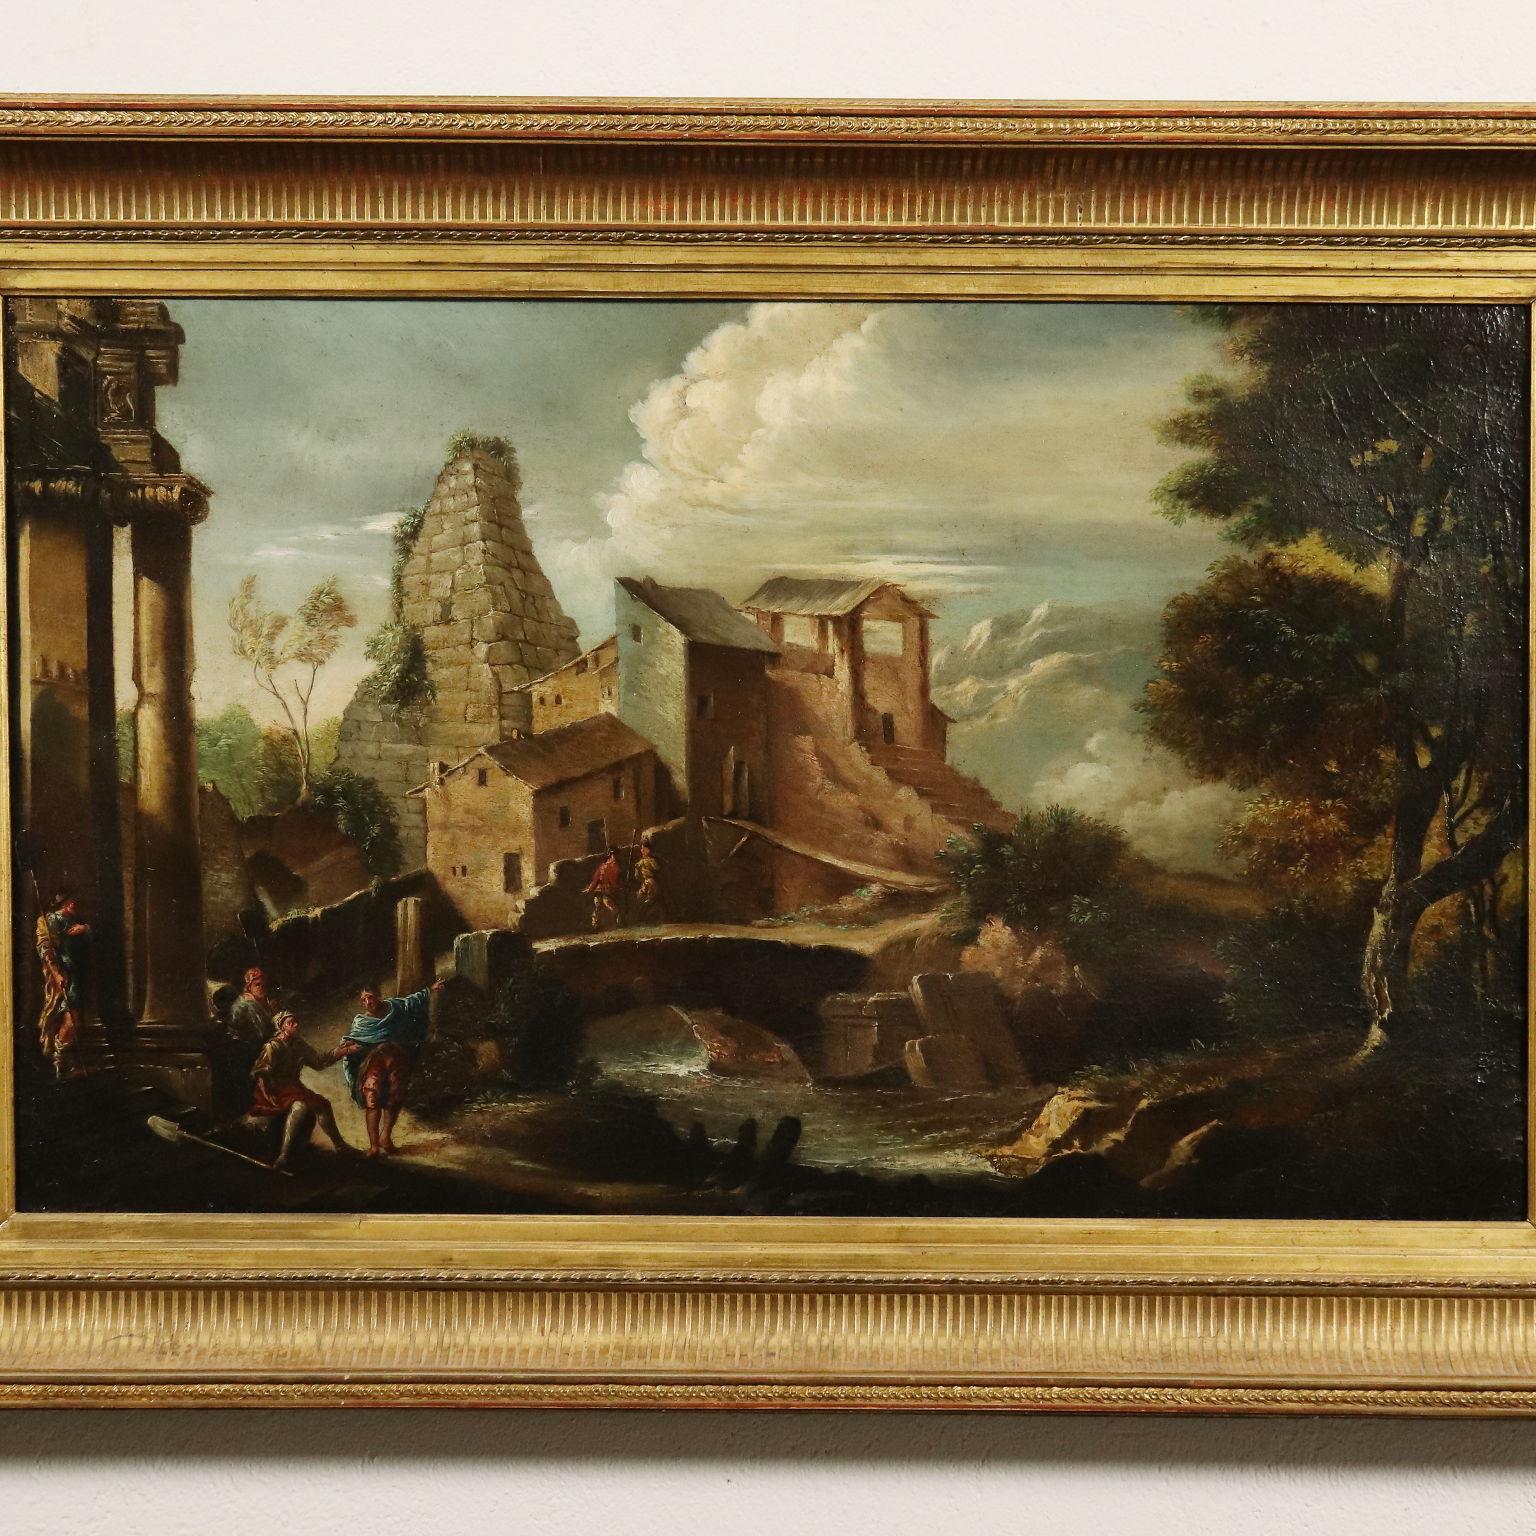 Landscape with Architectures and Figures Center-Italian School 1700 - Other Art Style Painting by Unknown